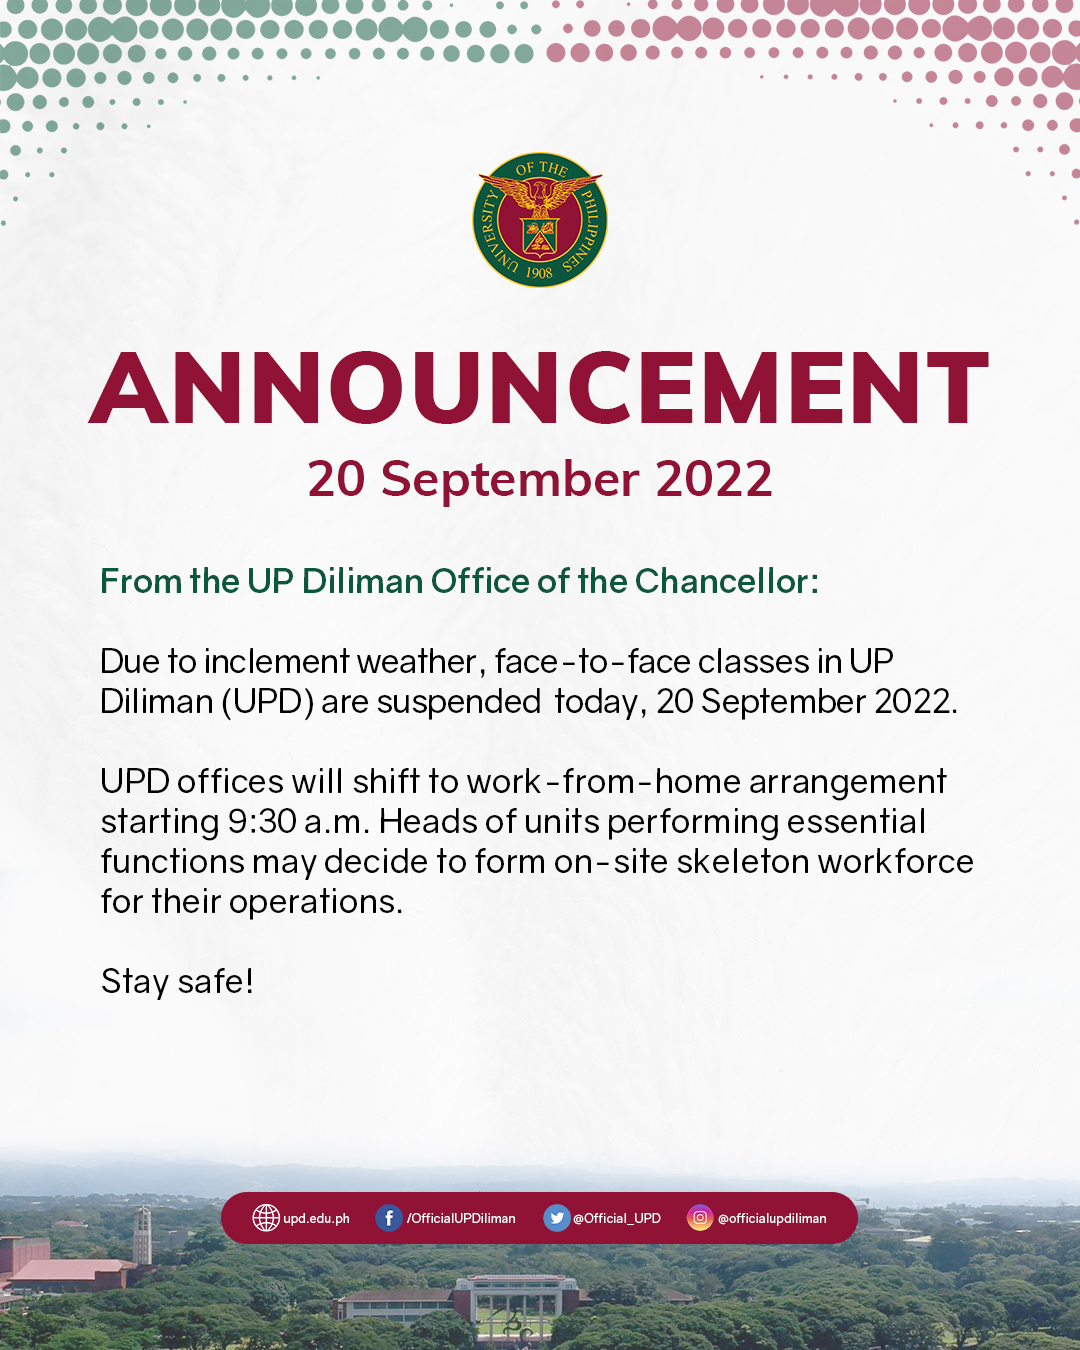 UP Diliman Advisory on Suspension of Work and Classes (20 September